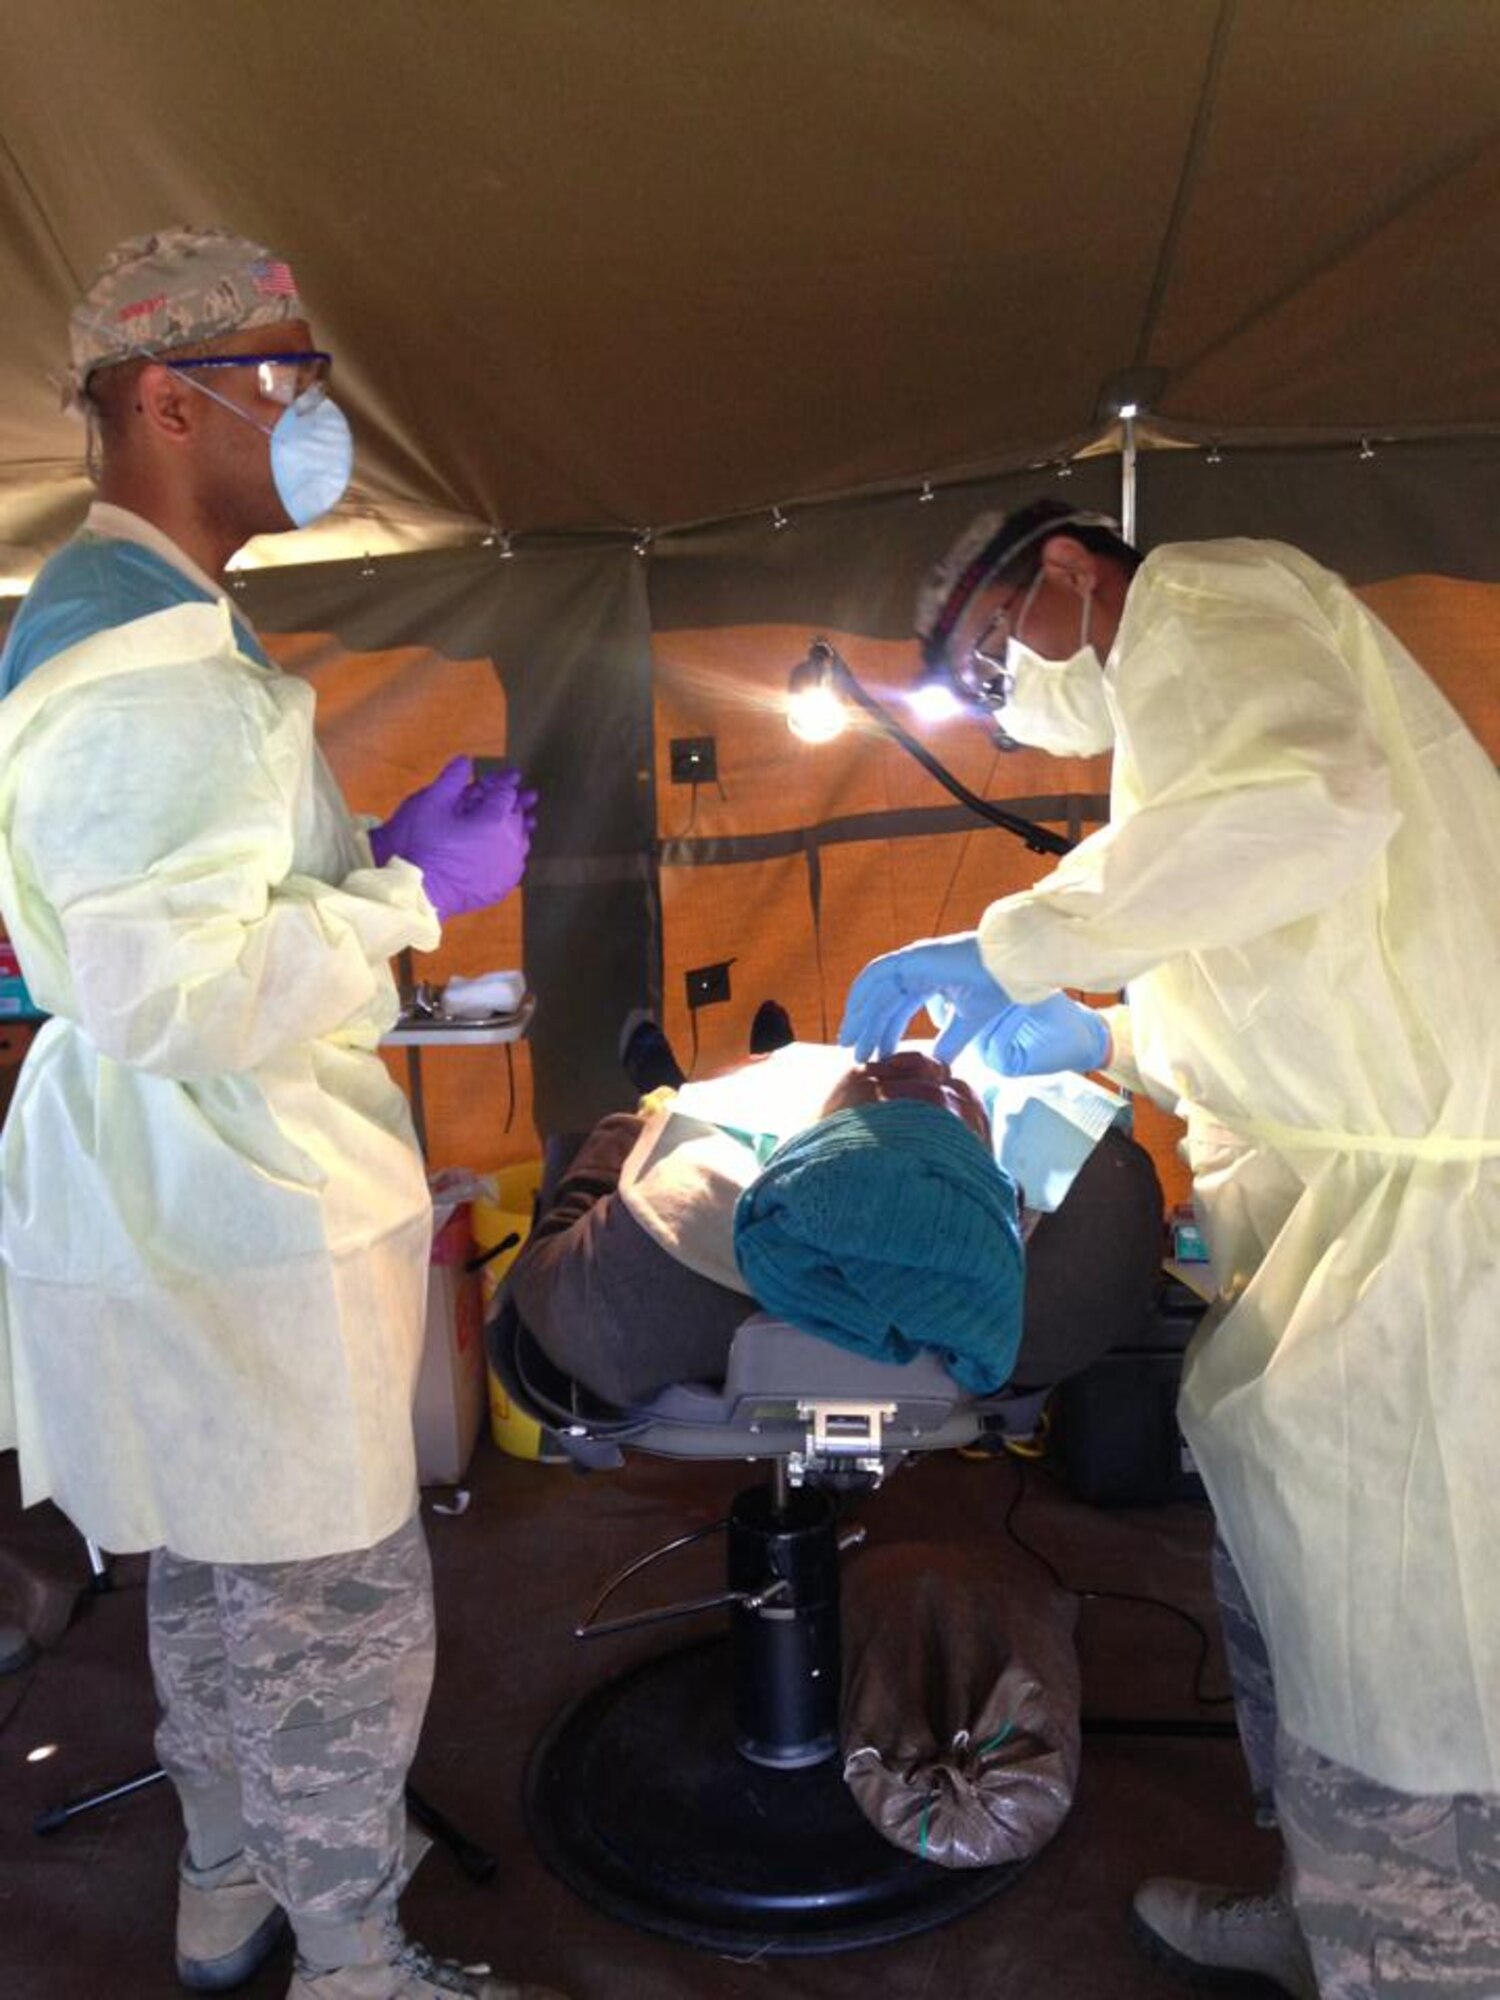 Tech. Sgt. Rowan Strong (left), 31st Dental Squadron clinical flight chief, assists during a dental procedure while on a humanitarian mission, July 21 to Aug. 8, 2013, near King Williams' Town, Eastern Cape province, South Africa.  During the humanitarian civic action event, the Airmen worked with South African dentists, providing 799 dental care procedures to more than 500 patients. (Courtesy photo) 